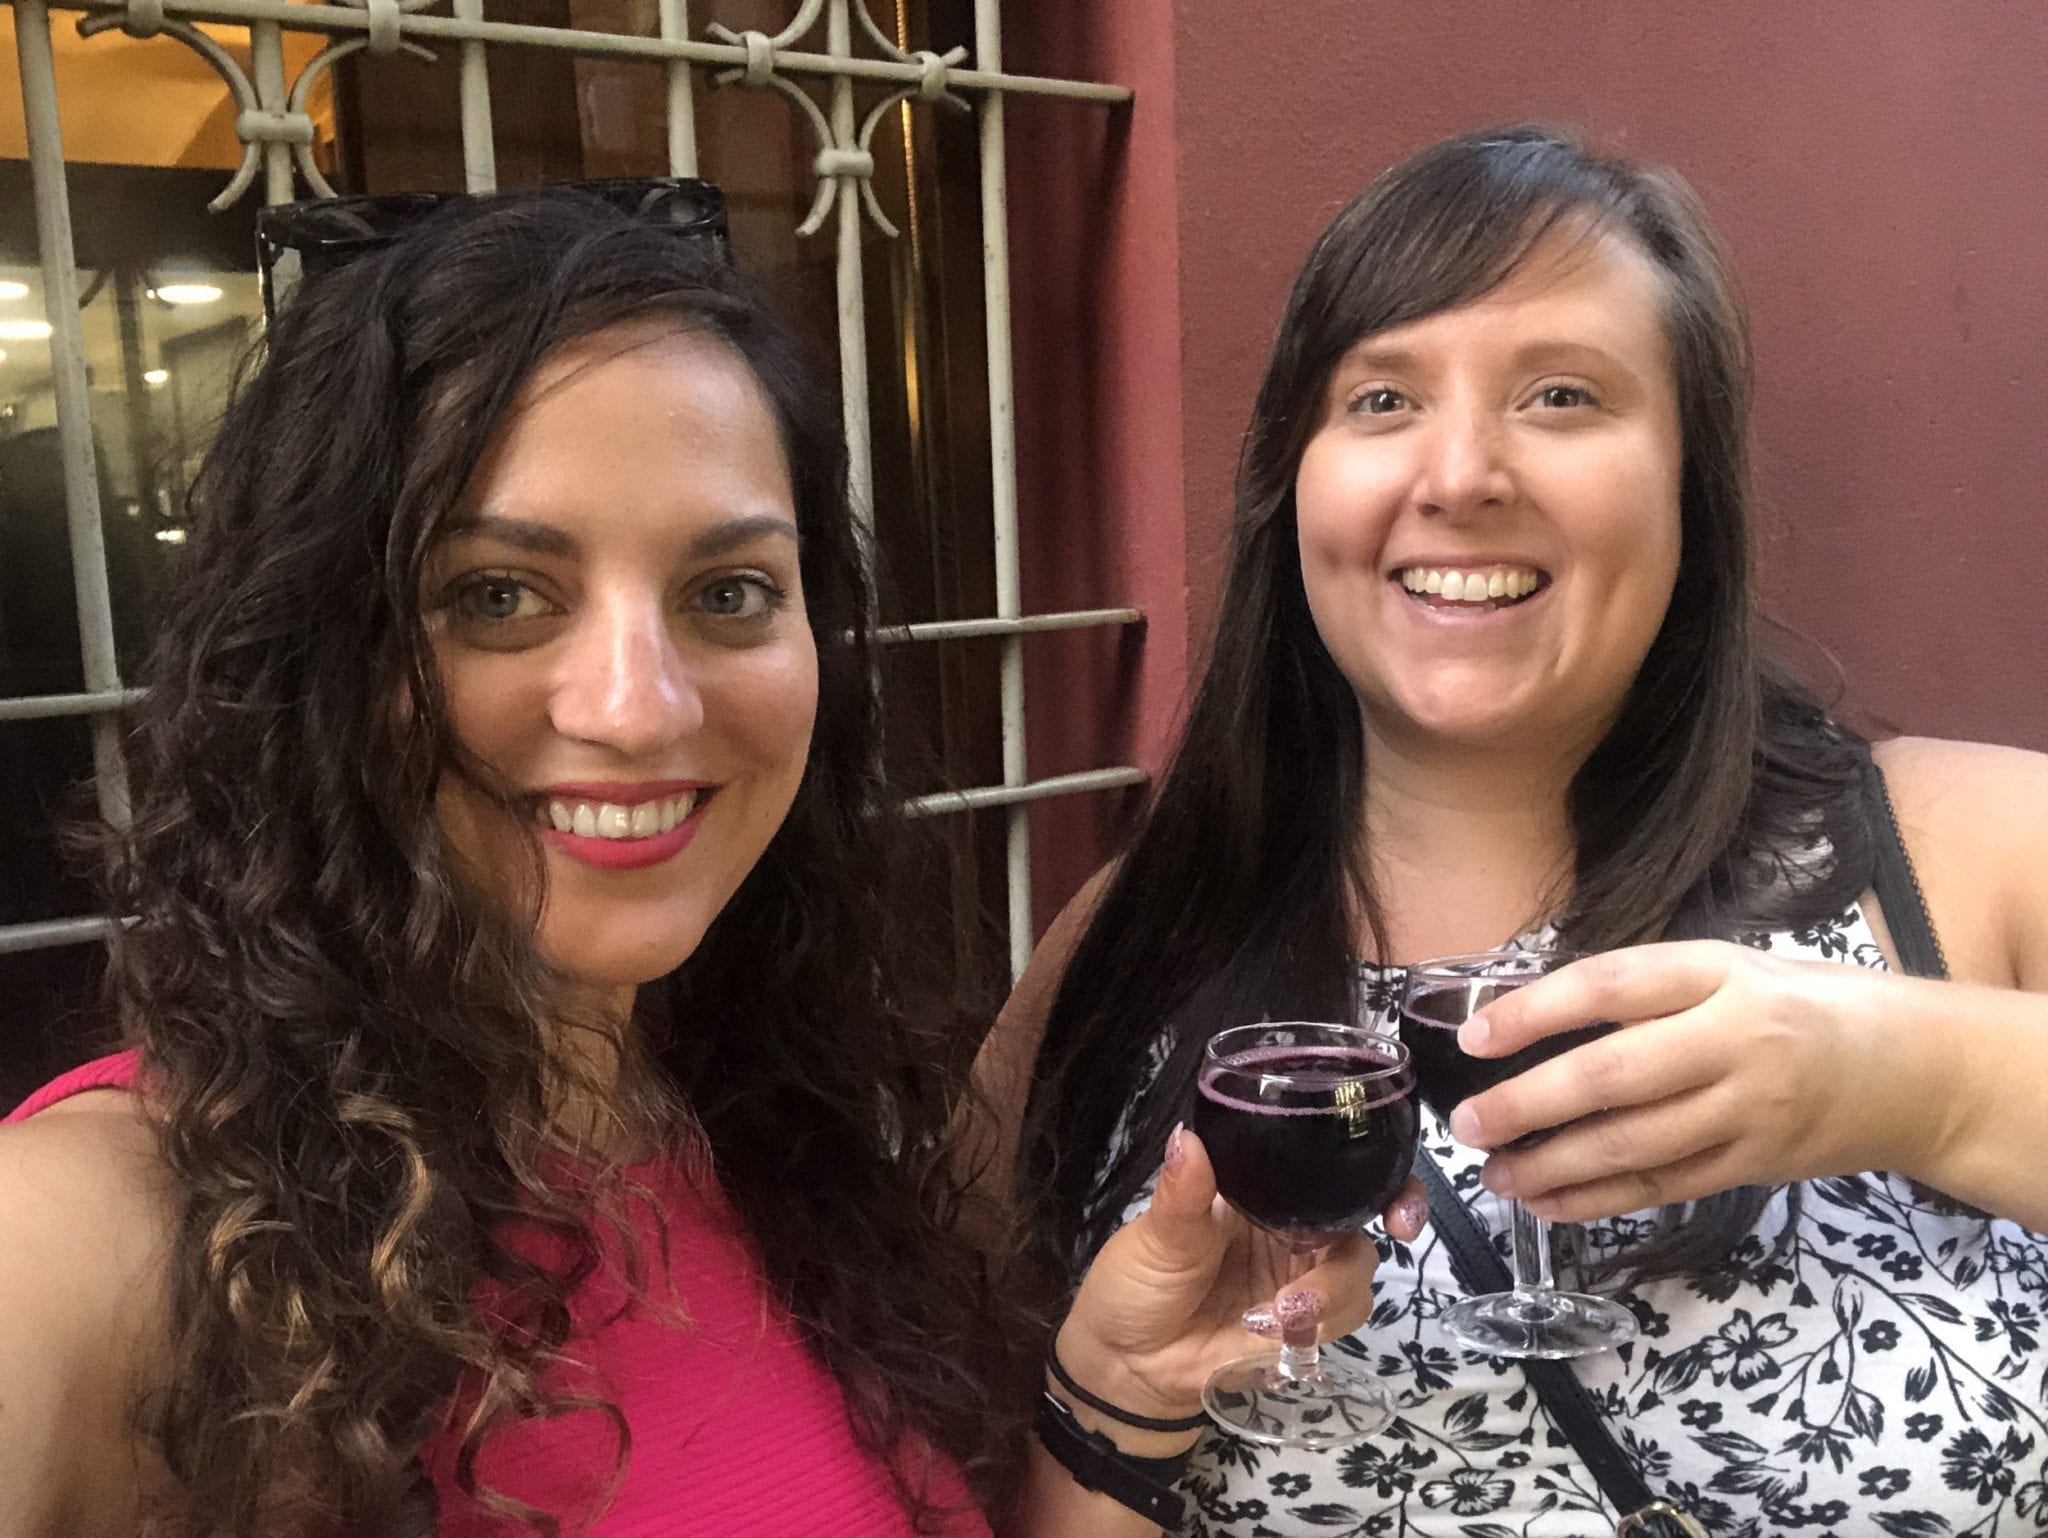 Kate and Cailin take a smiling selfie while toasting small glasses of red lambrusco wine.